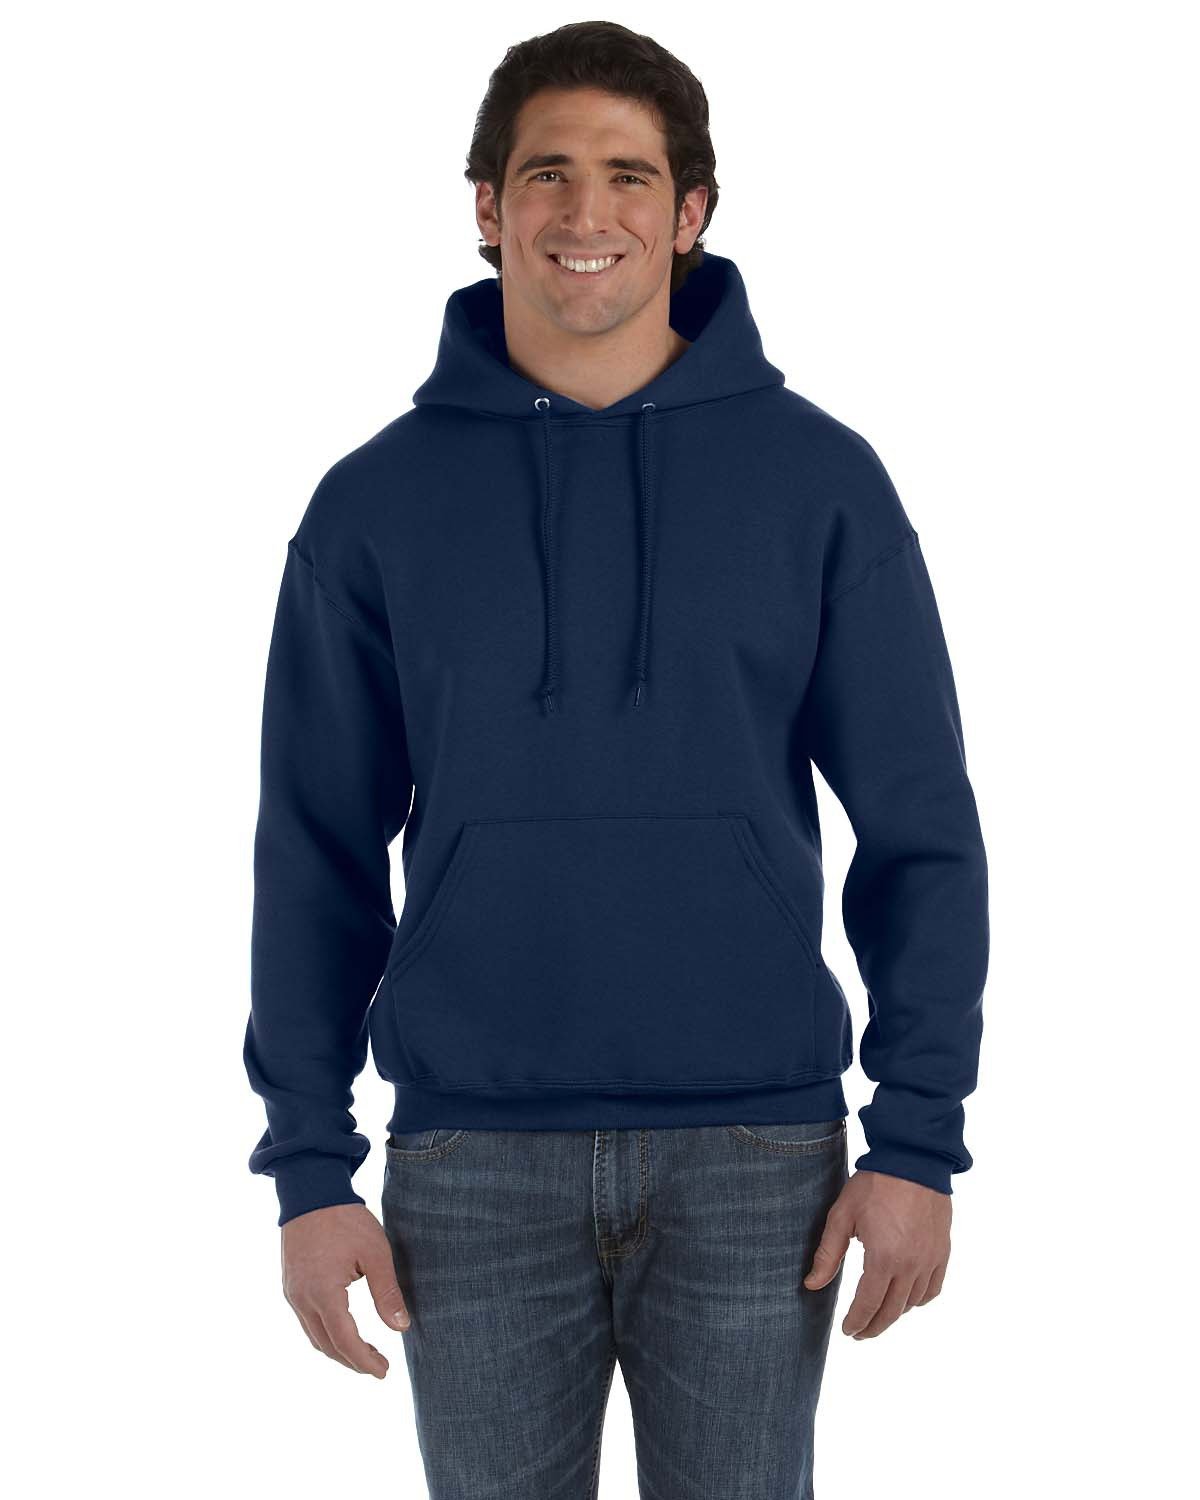 Fruit of the Loom Adult Supercotton™ Pullover Hooded Sweatshirt J NAVY 